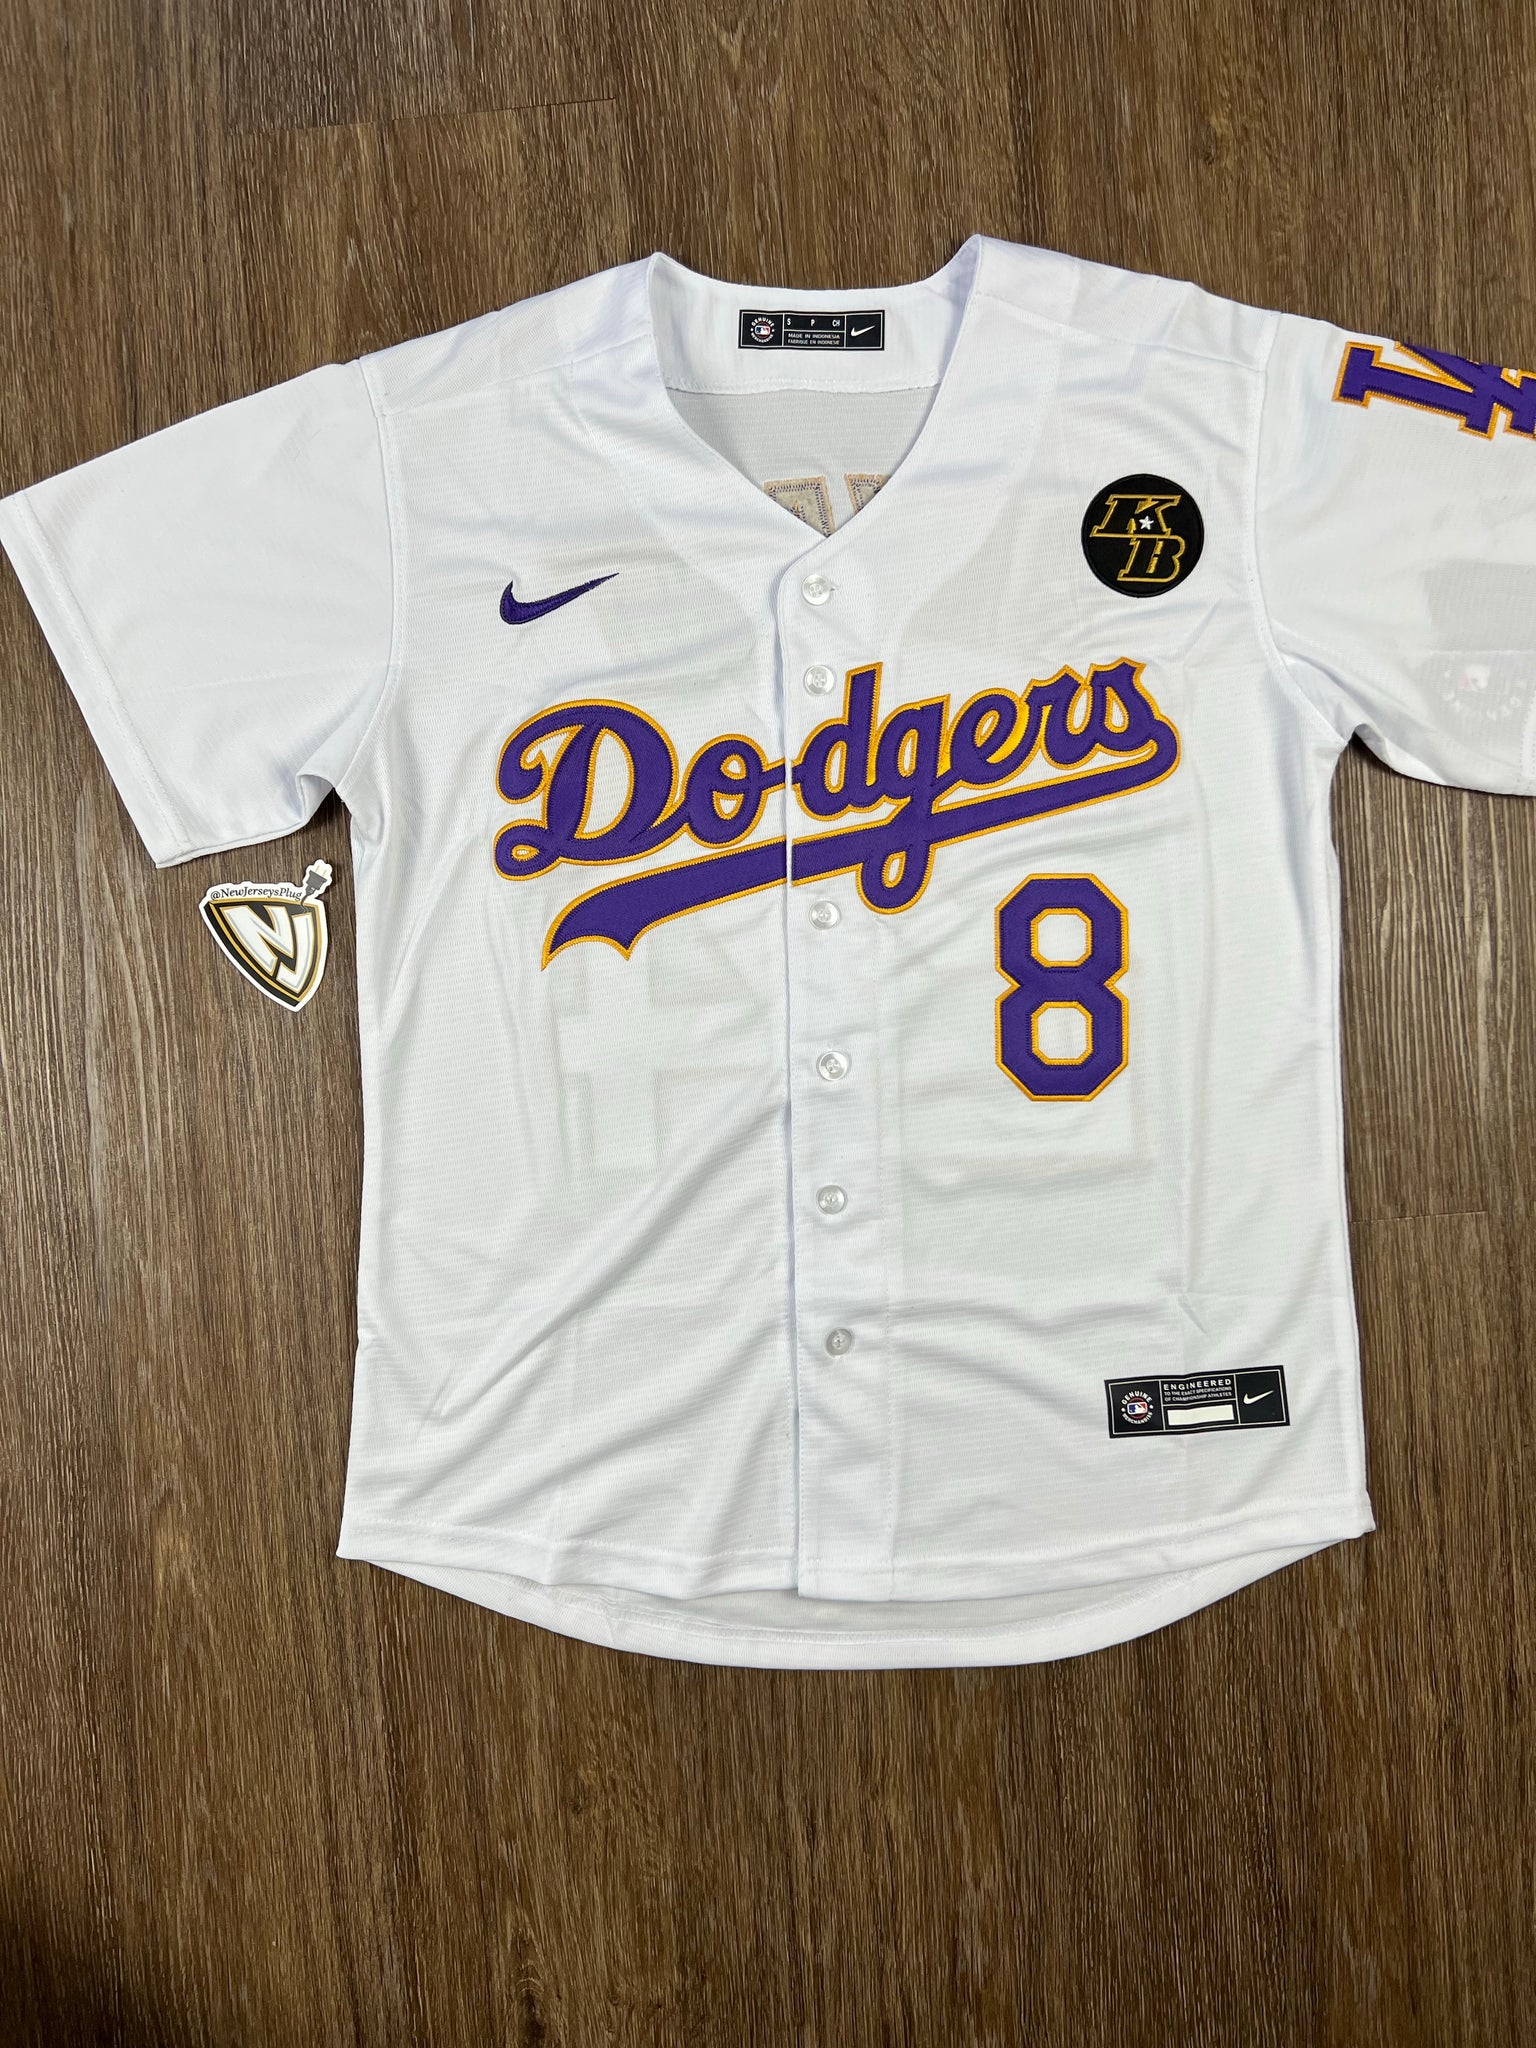 🌠Kobe Bryant Los Angles Dodgers Jersey  Dodgers jerseys, Dodgers, Kobe  bryant black mamba